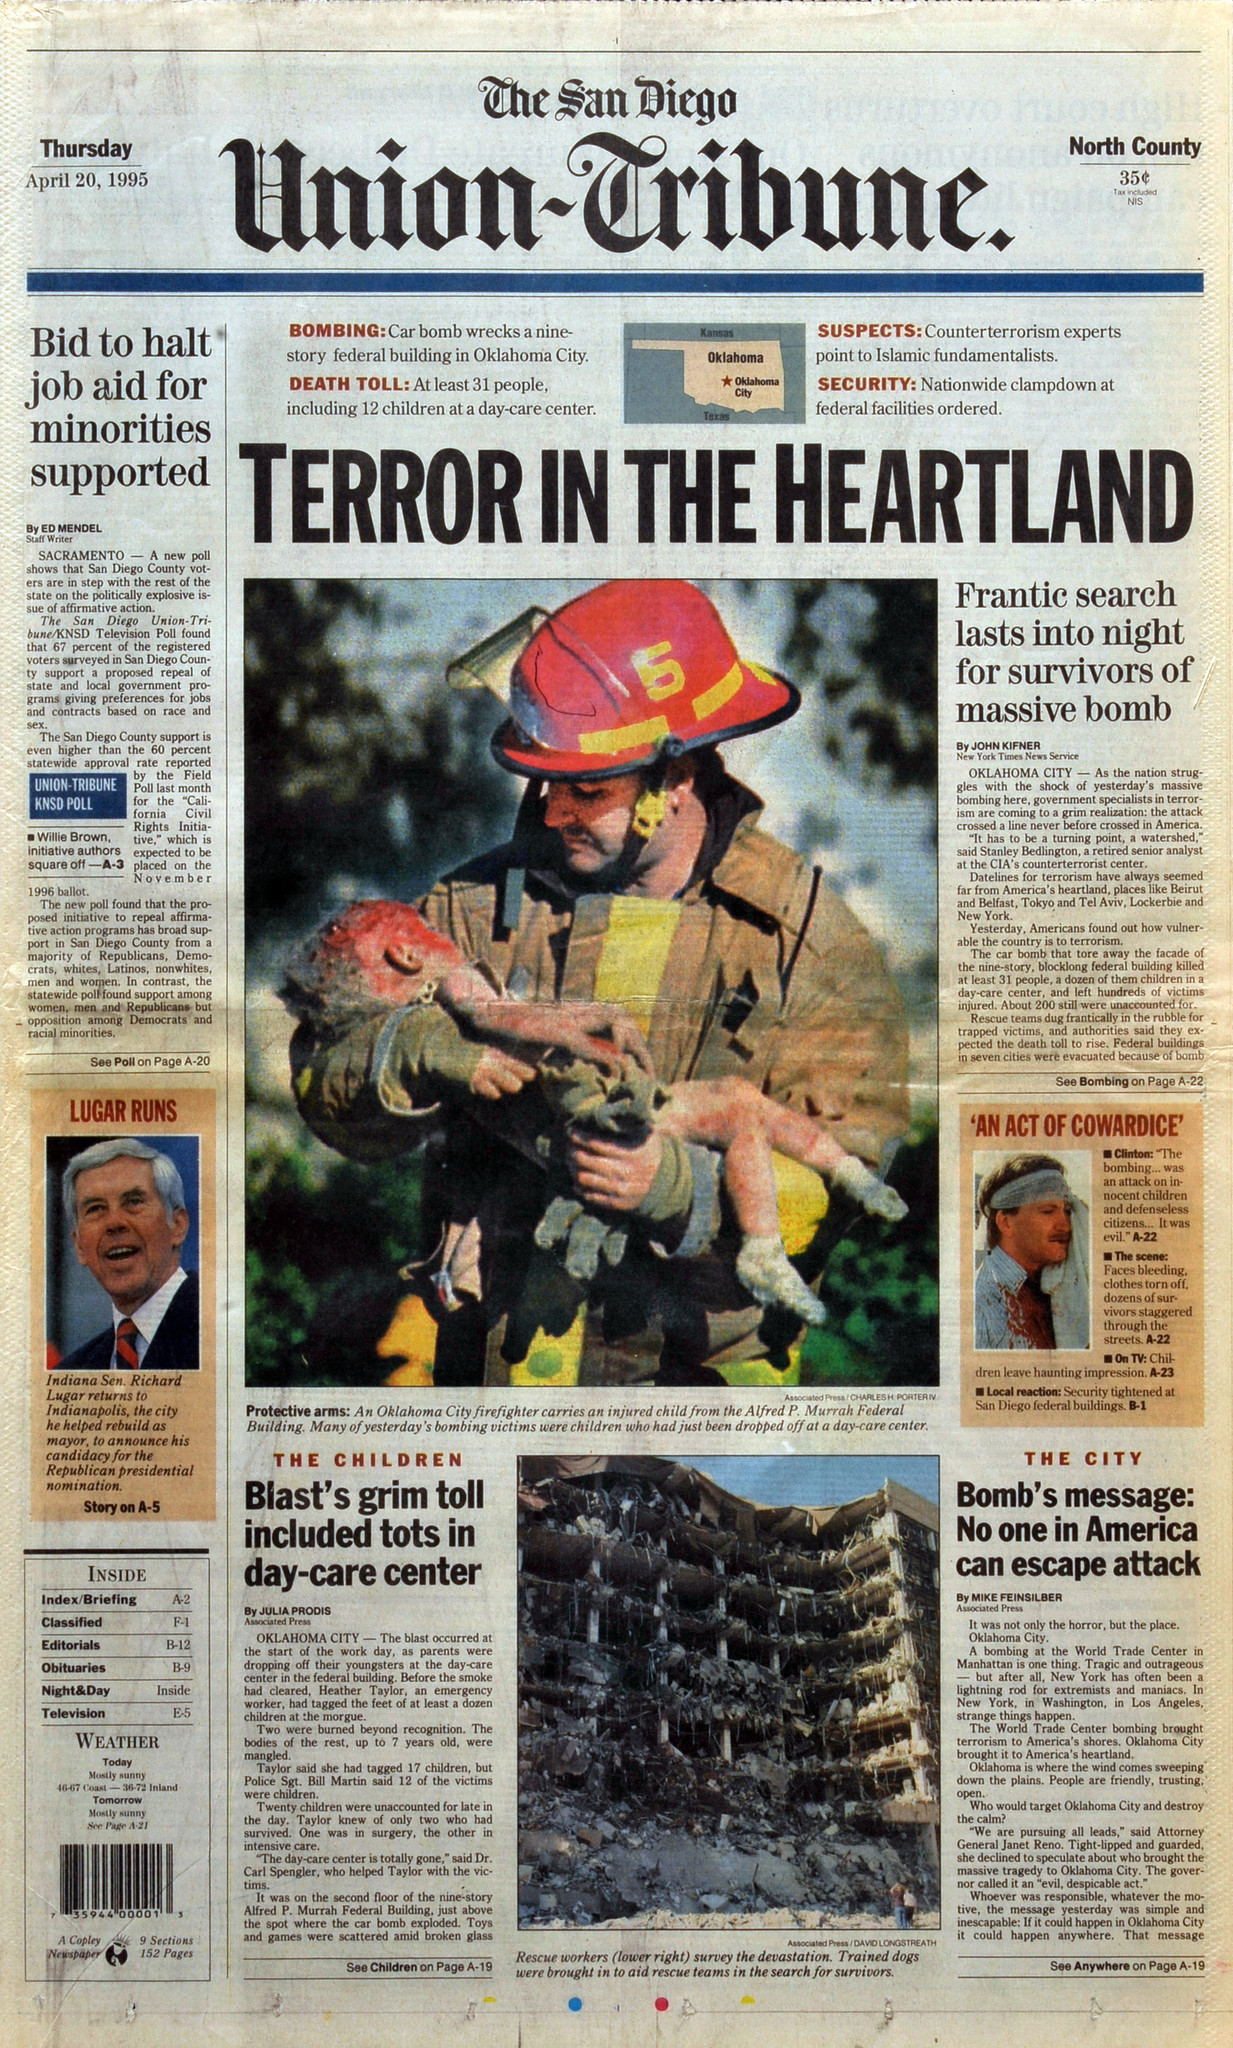 25 years on: Remembering the OKC bombing — and how the media erred | The 1995 Blog